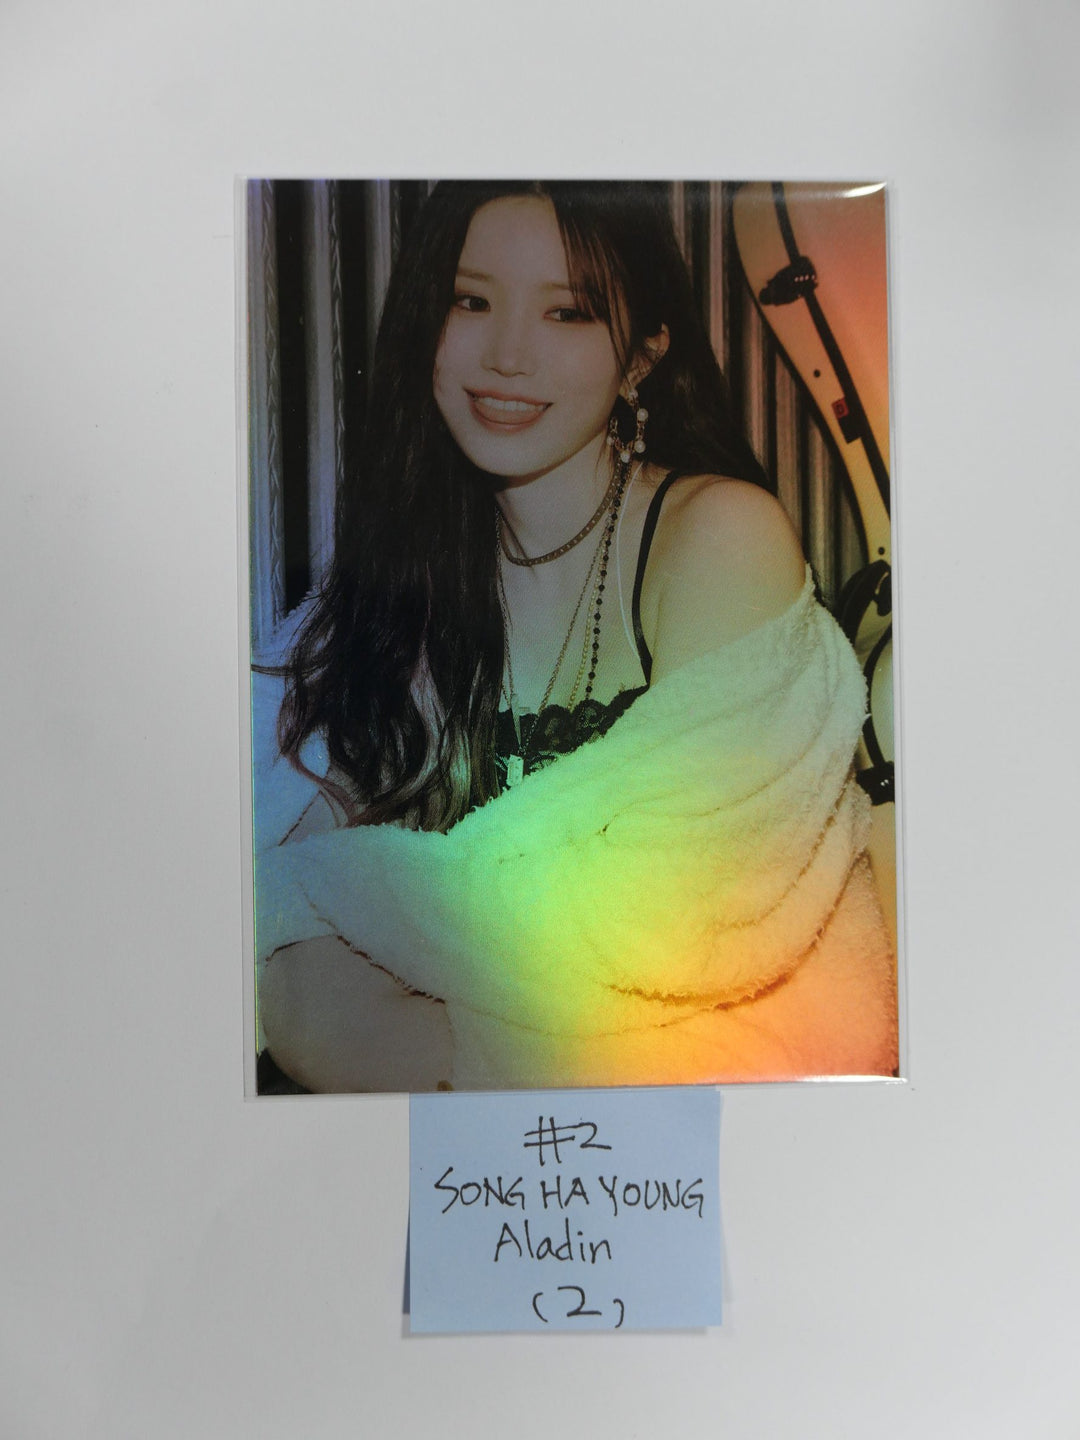 Fromis_9 "Midnight Guest" - Aladin Pre-Order Benefit Hologram Postcard